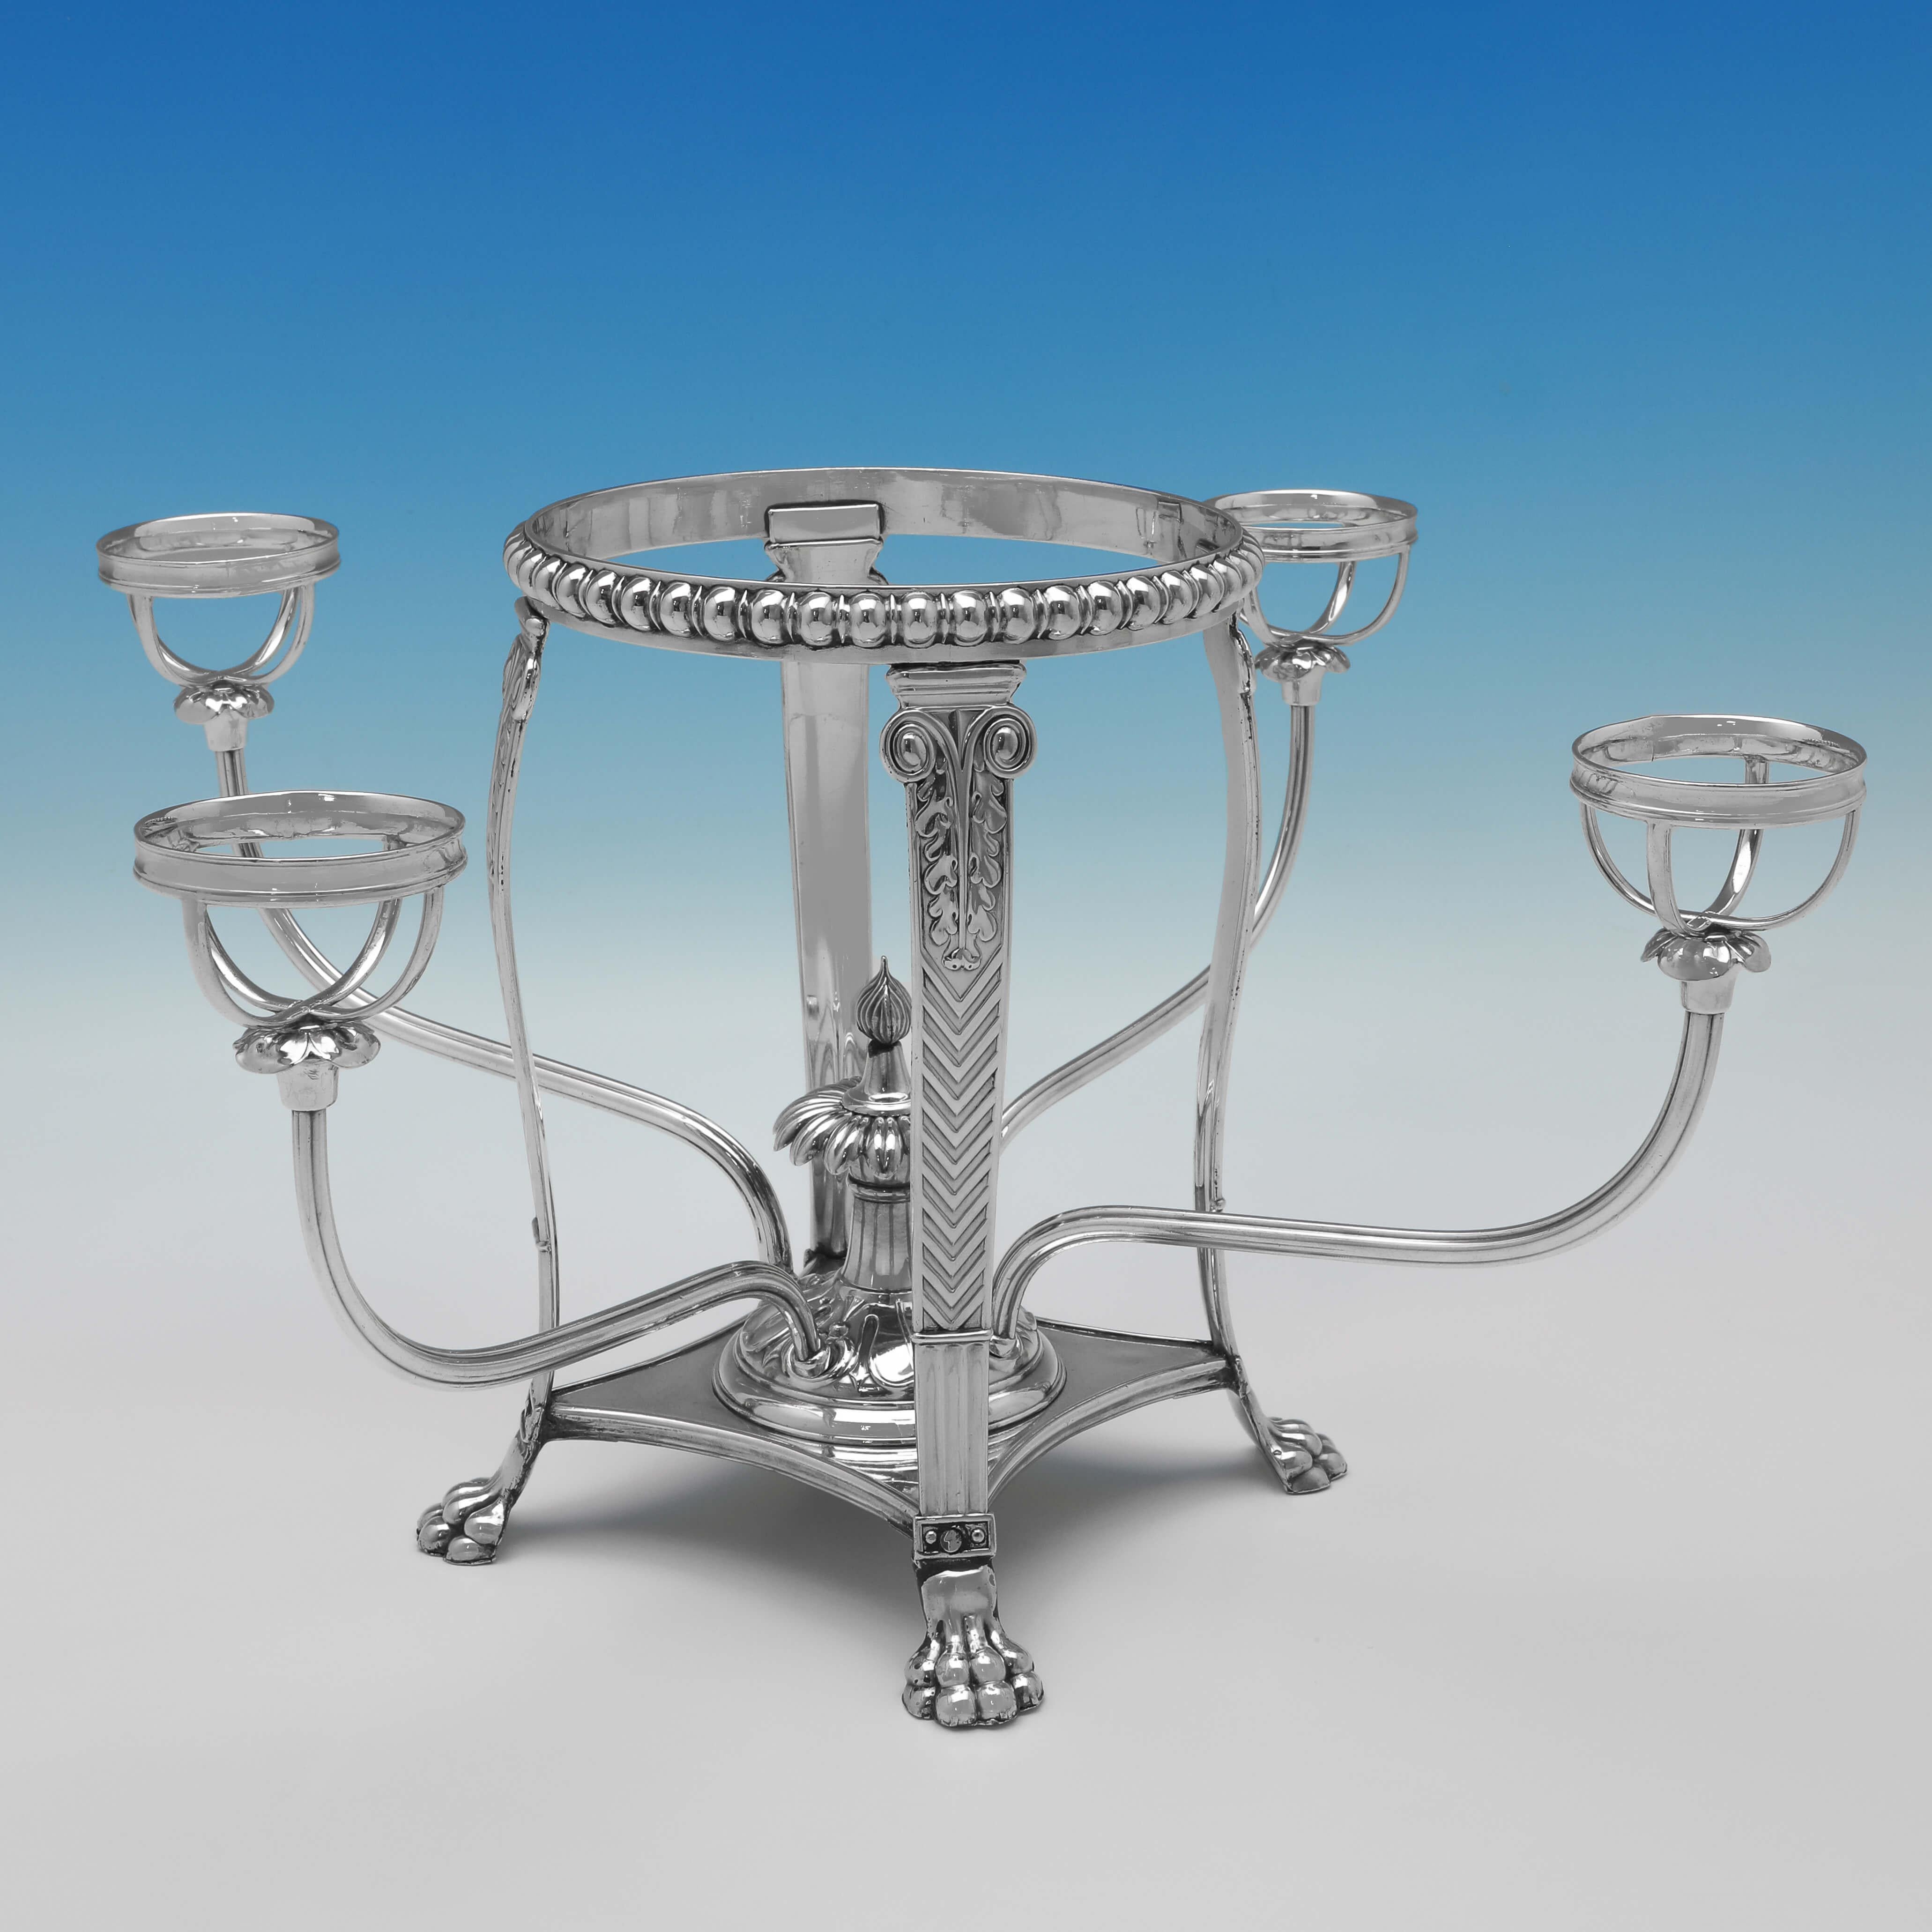 Regency Period Old Sheffield Plate Epergne or Centrepiece, Made circa 1815 For Sale 2